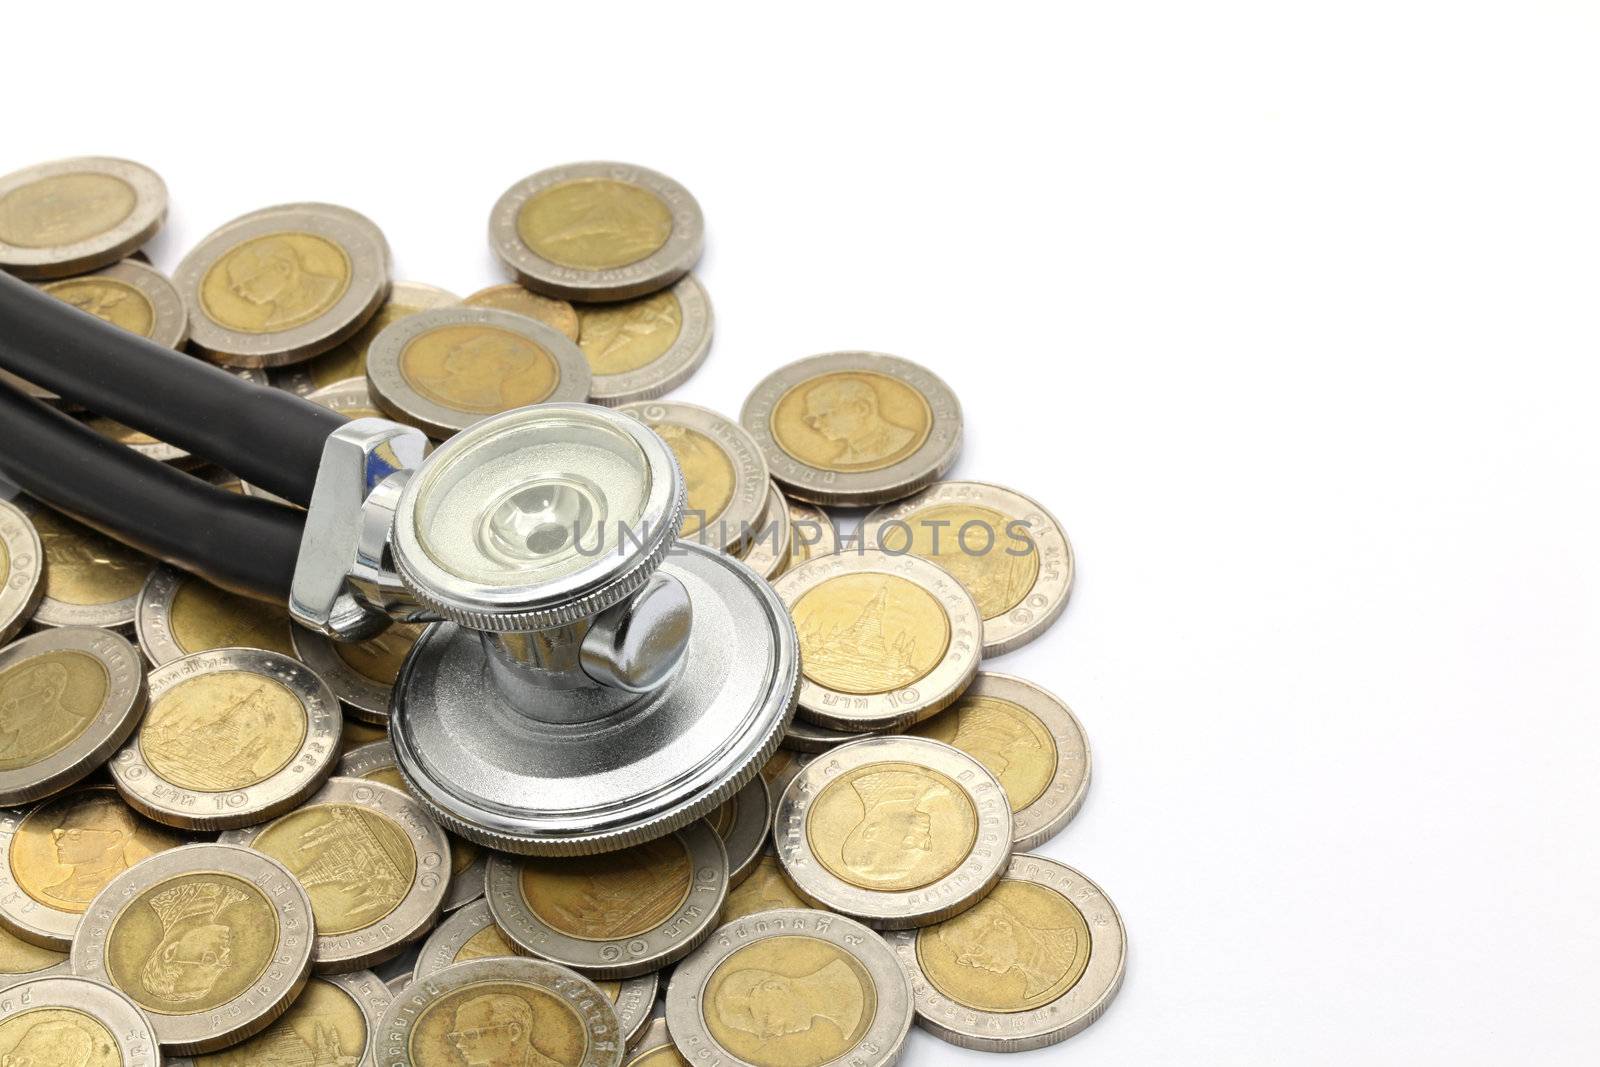 stethoscopeon currency coin for financial examination healthy concept